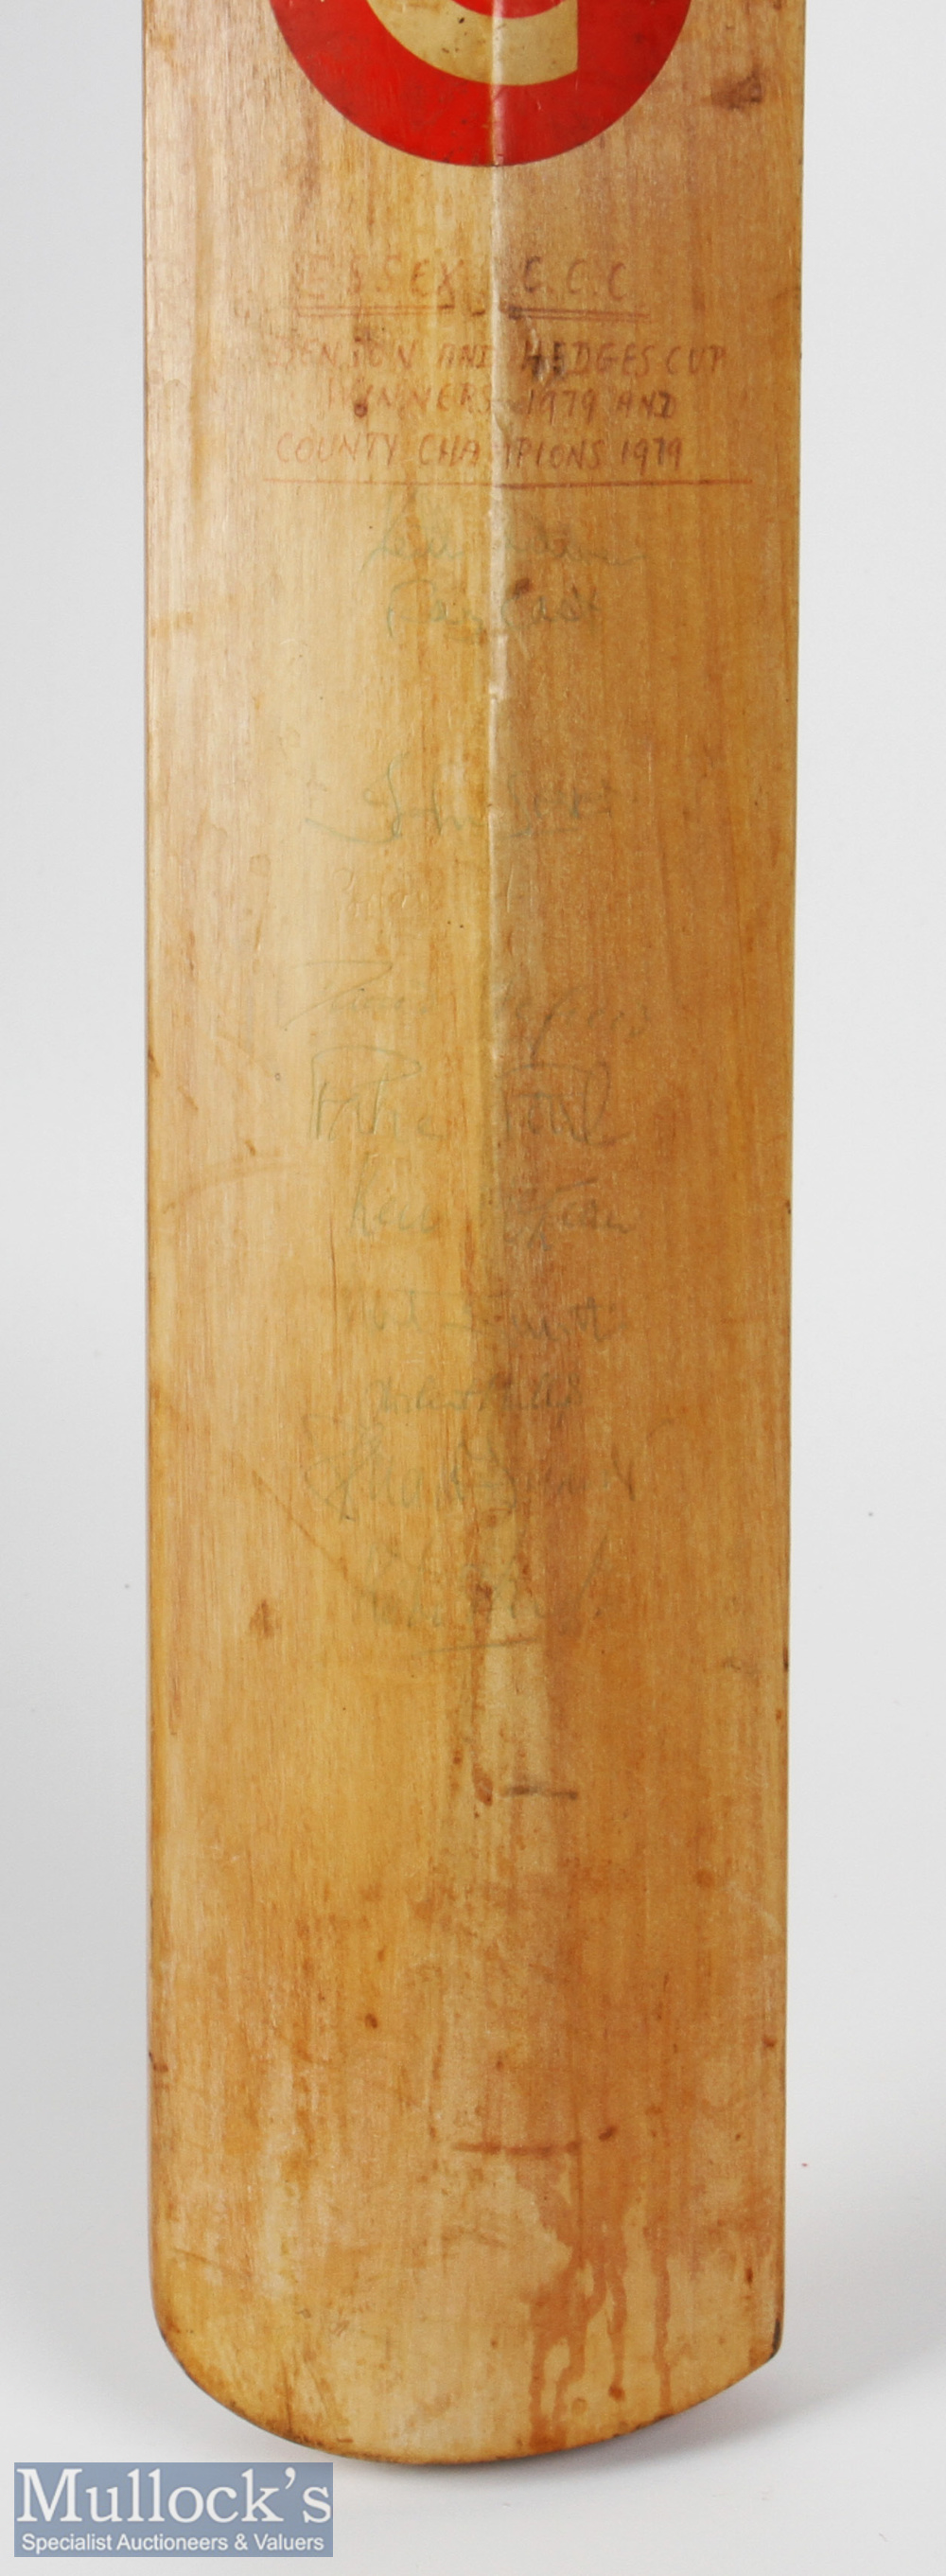 1979 Surrey CCC Signed Crickets bat, multi signed front and back with the winners of the Benson & - Image 4 of 4